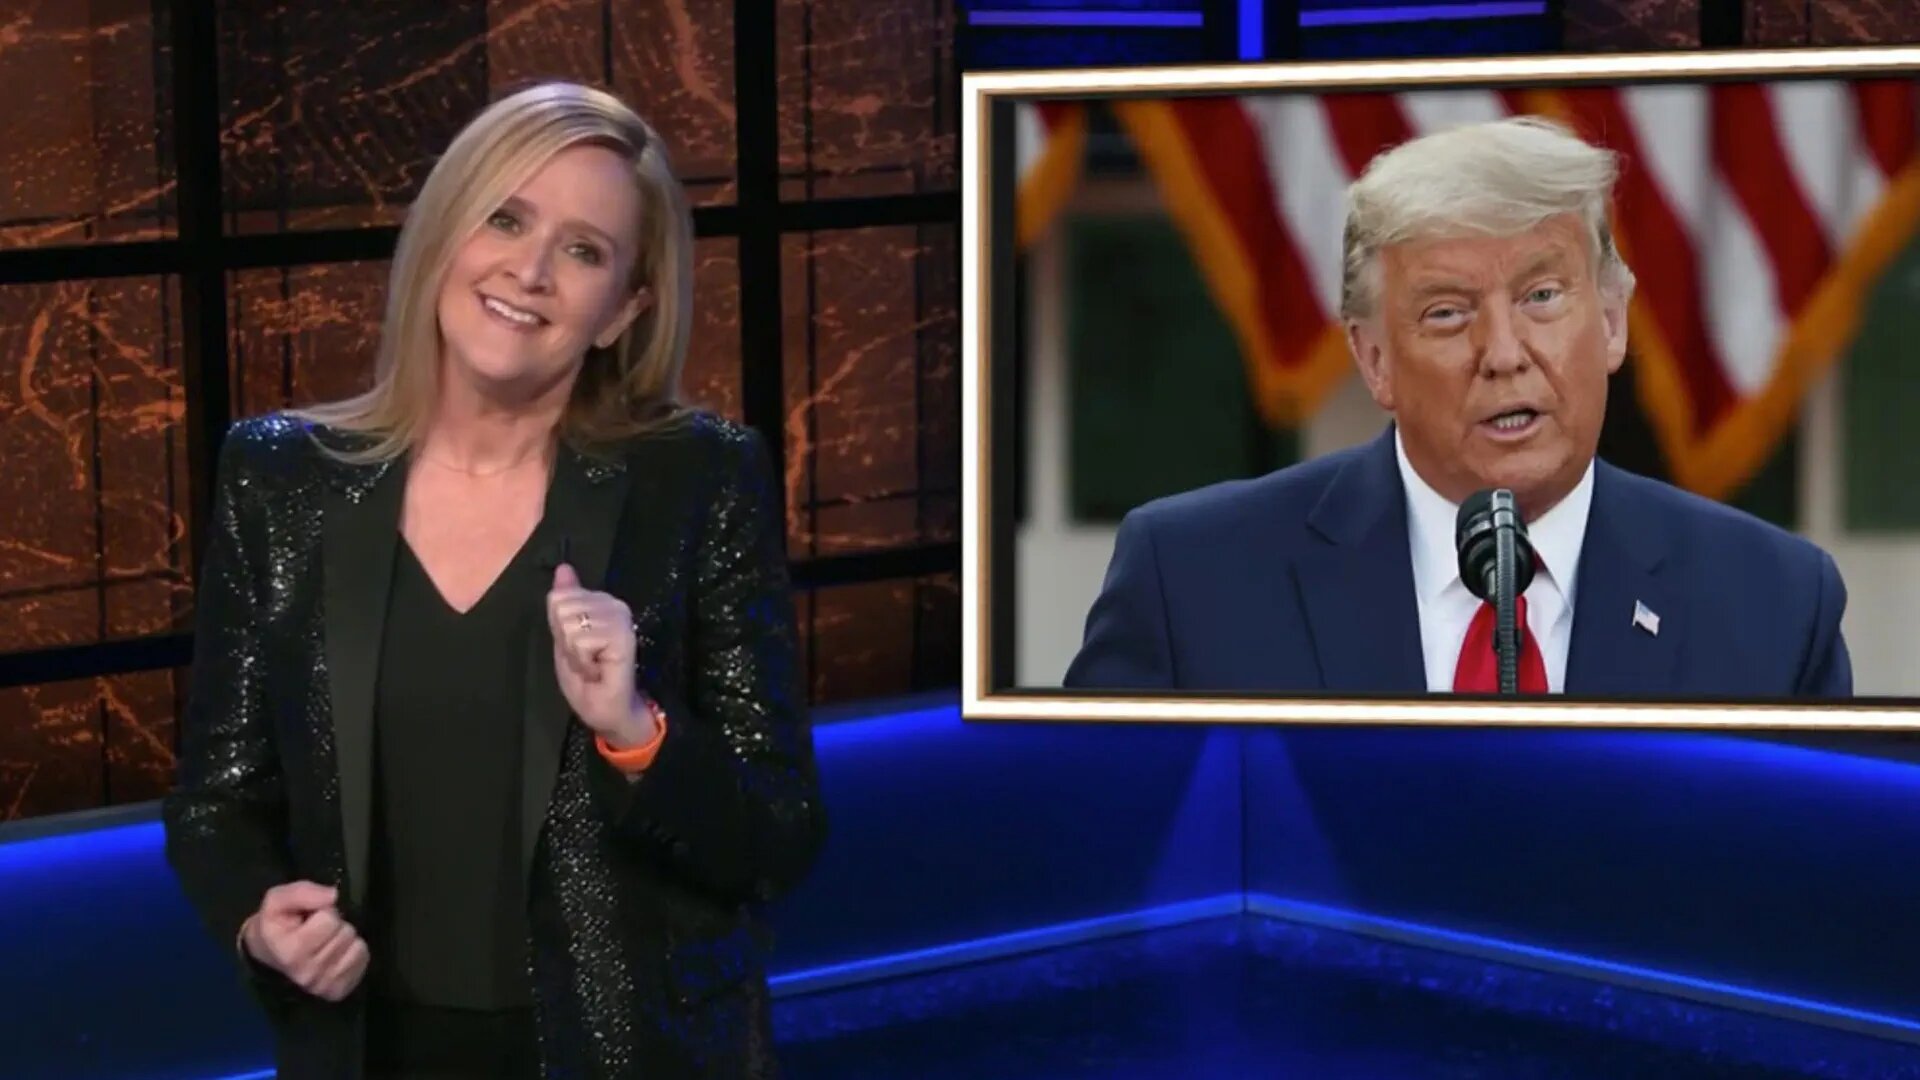 Full Frontal with Samantha Bee S5E31 December 9, 2020